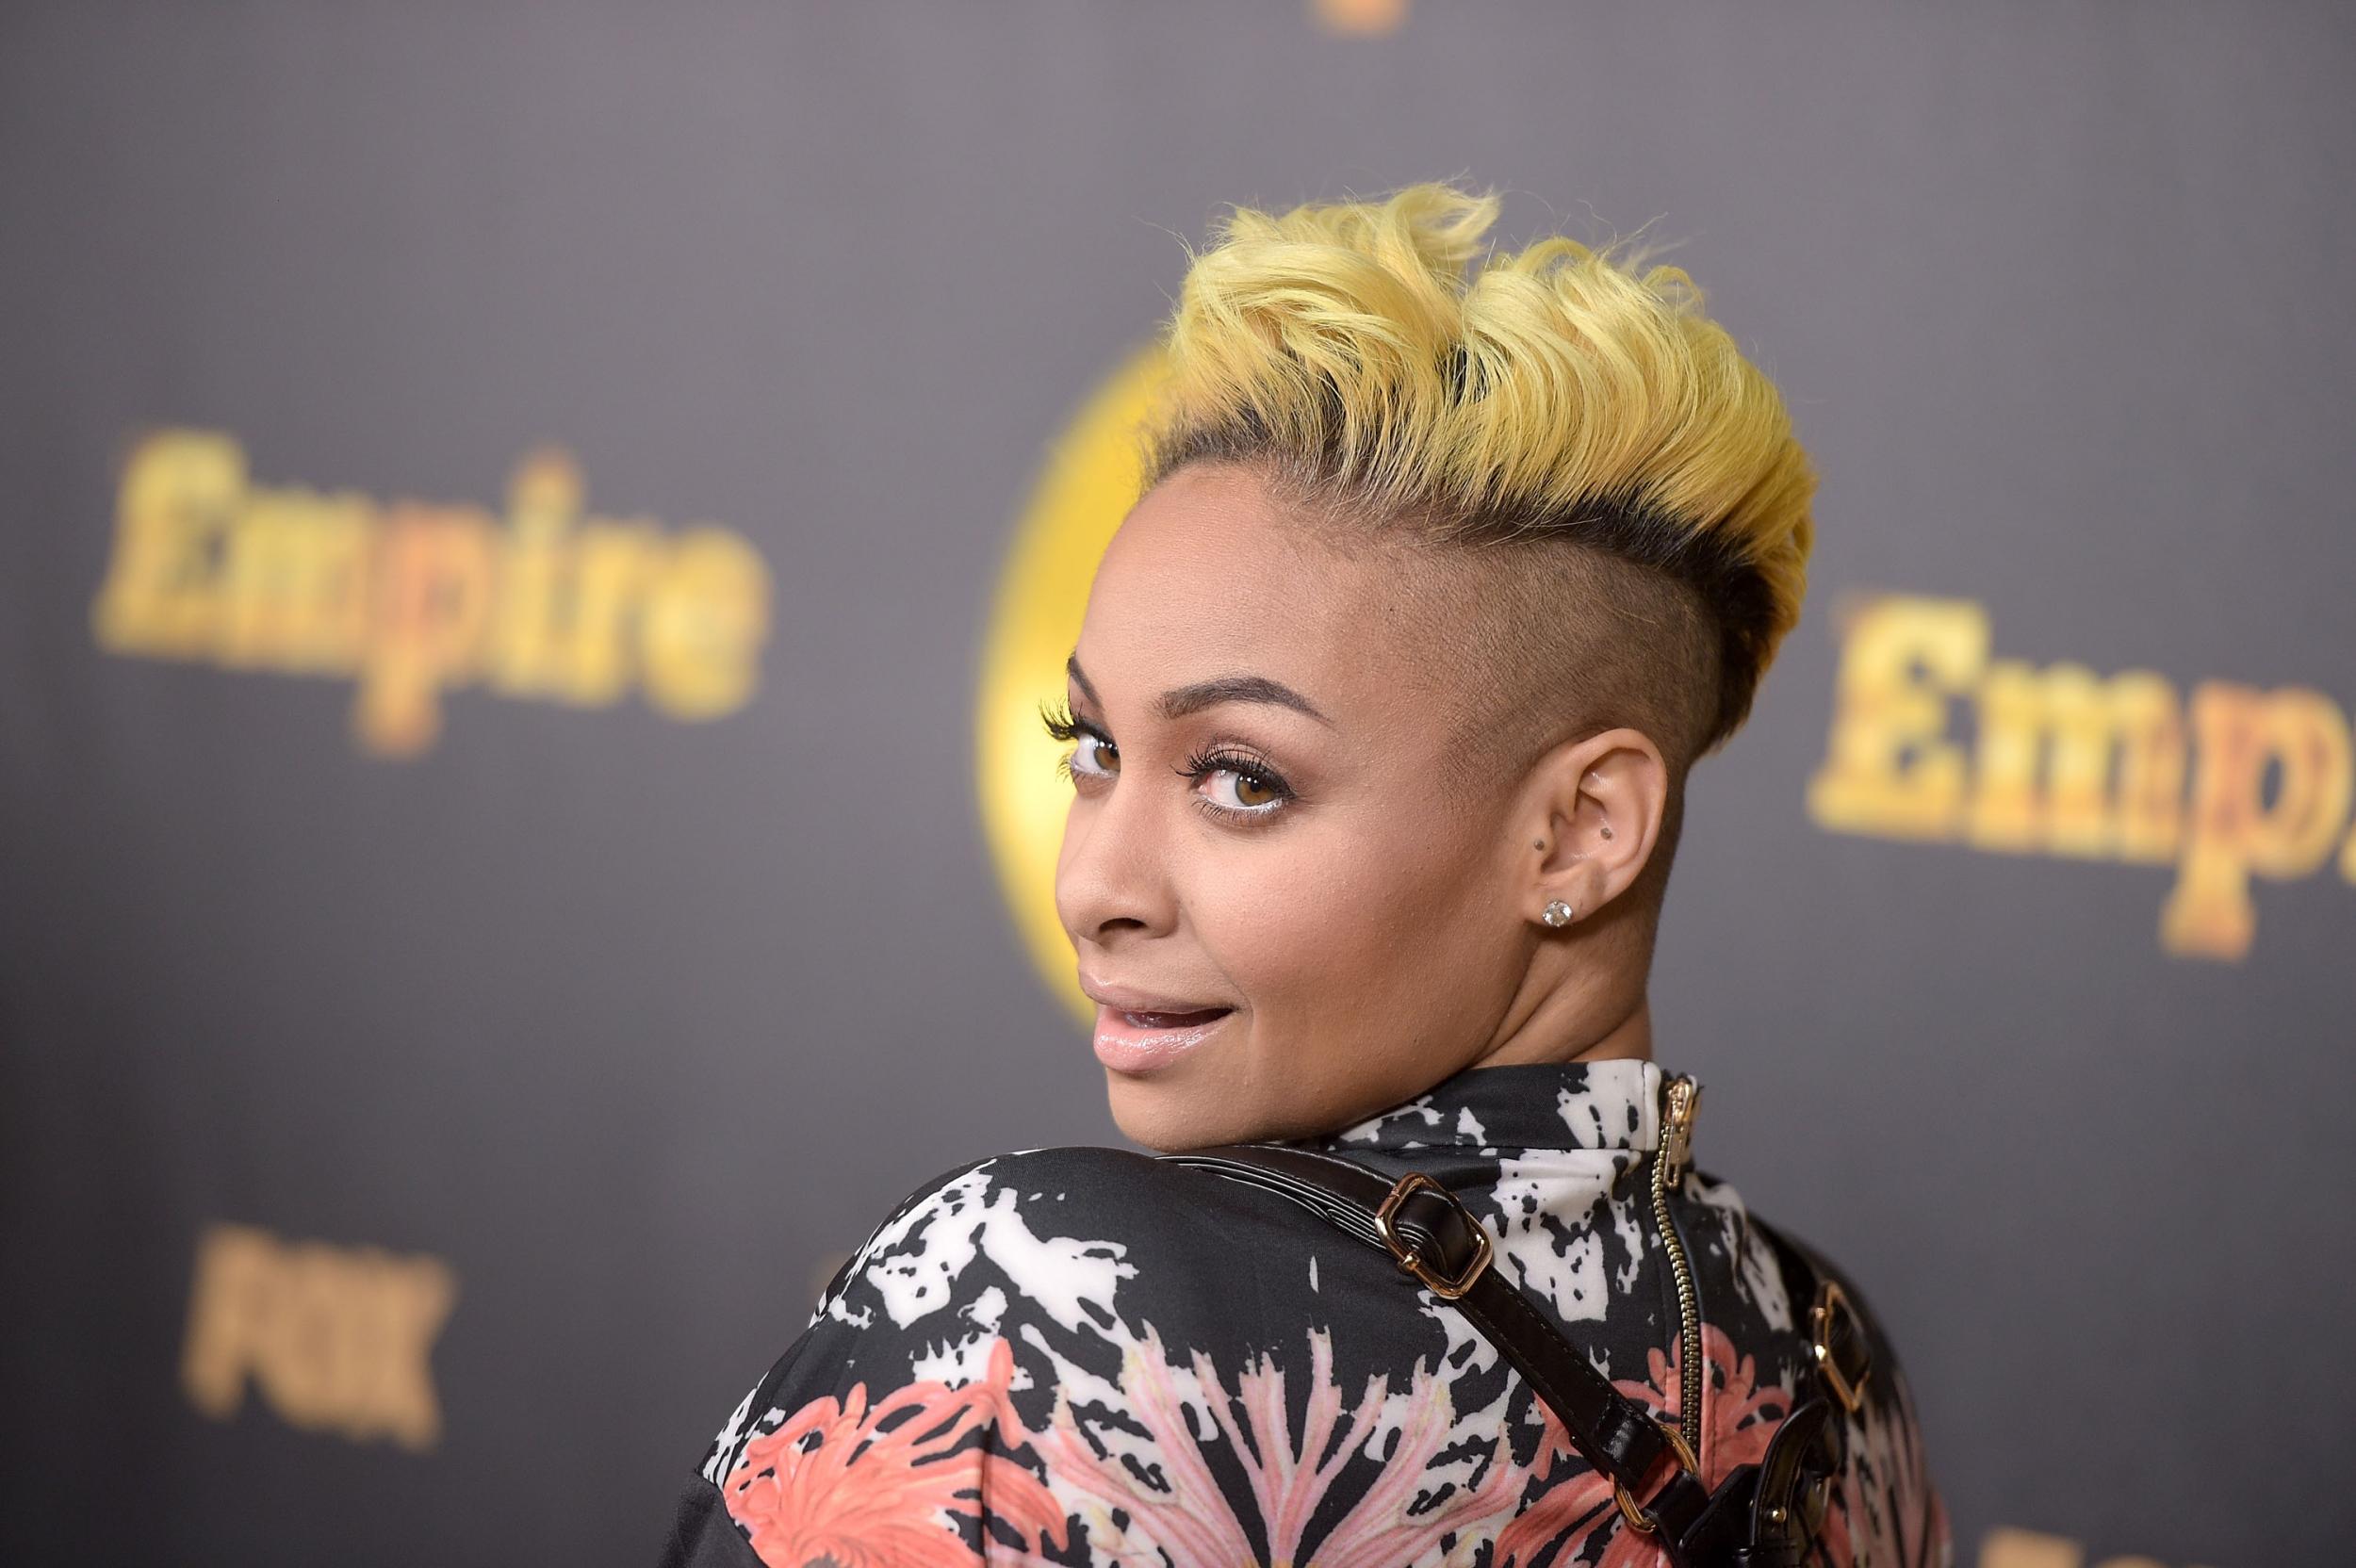 Former Disney Star Raven Symoné Says Pressure To Maintain Her Brand Forced Her To Suppress Her